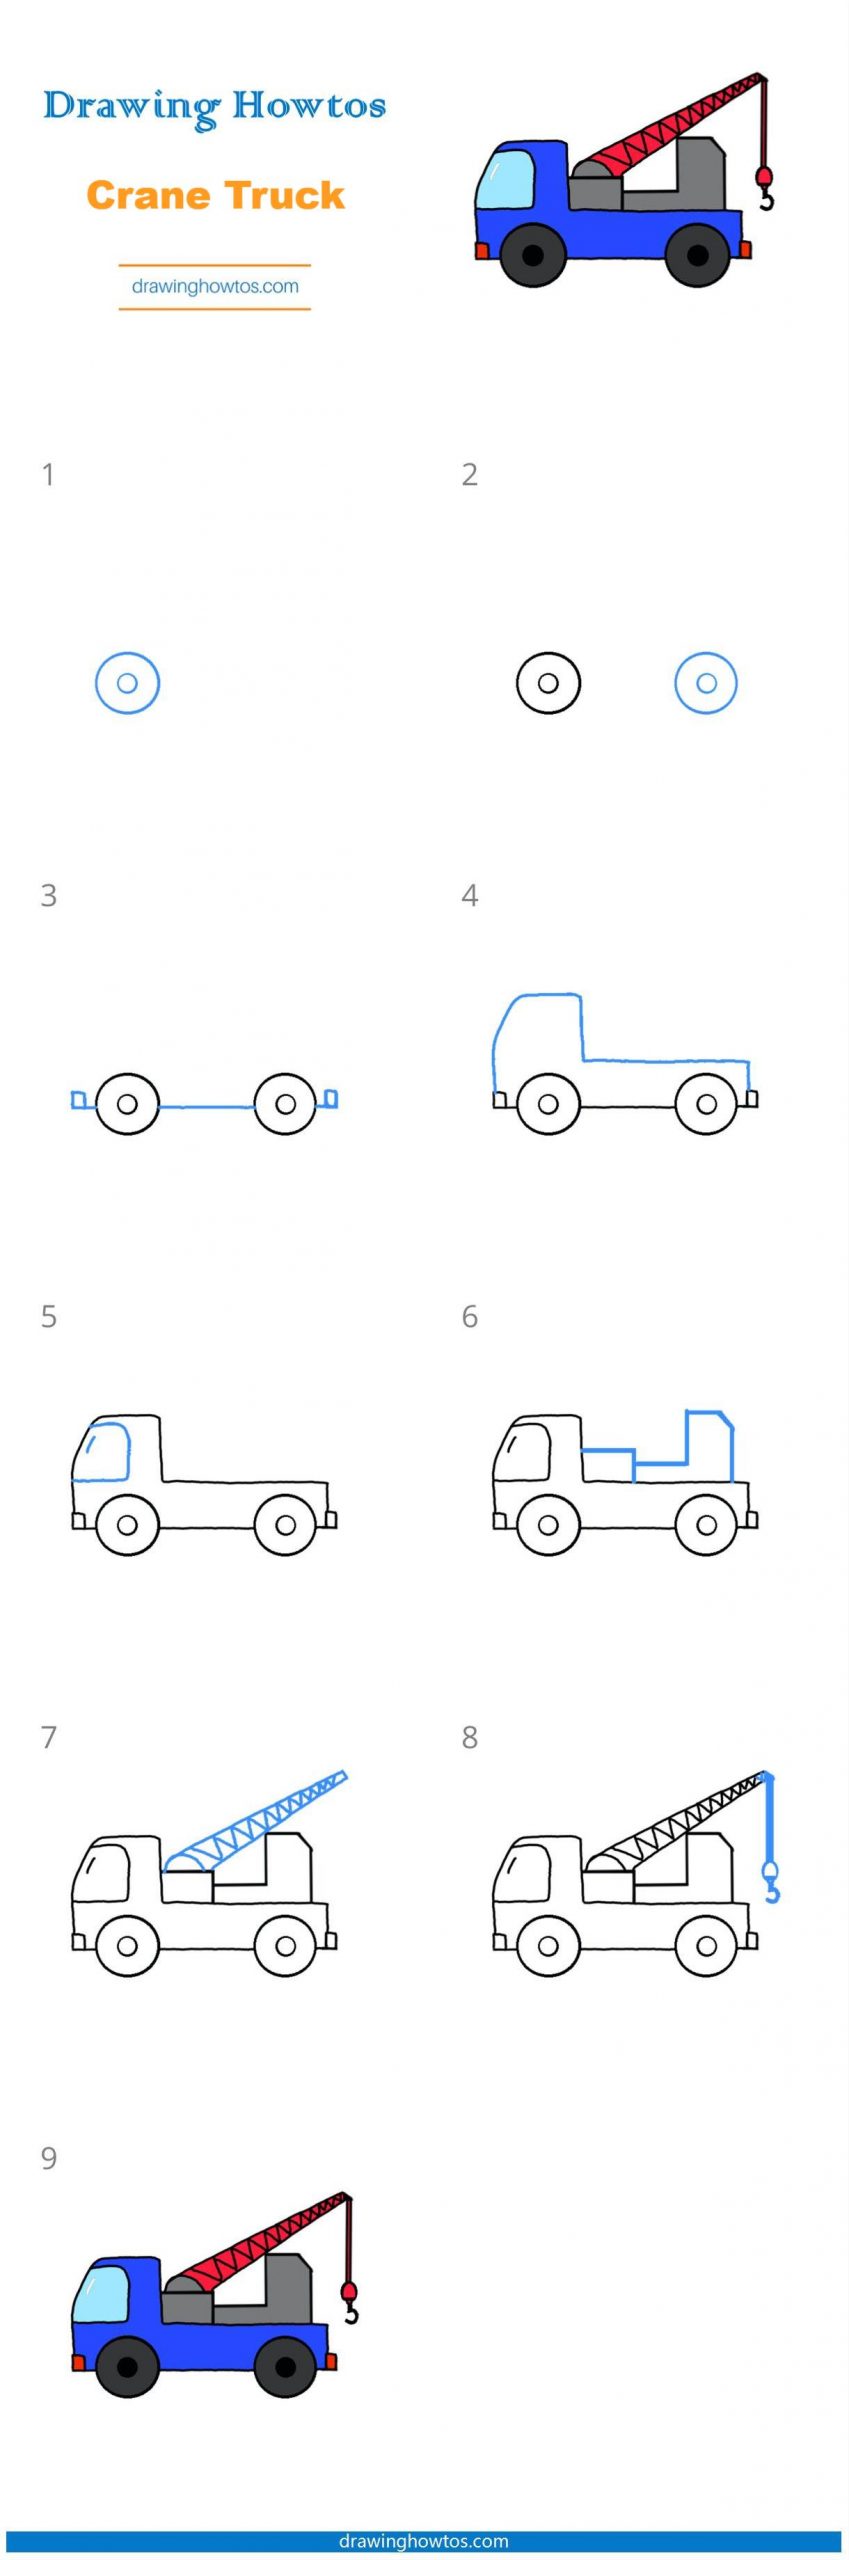 How to Draw a Crane Truck Step by Step